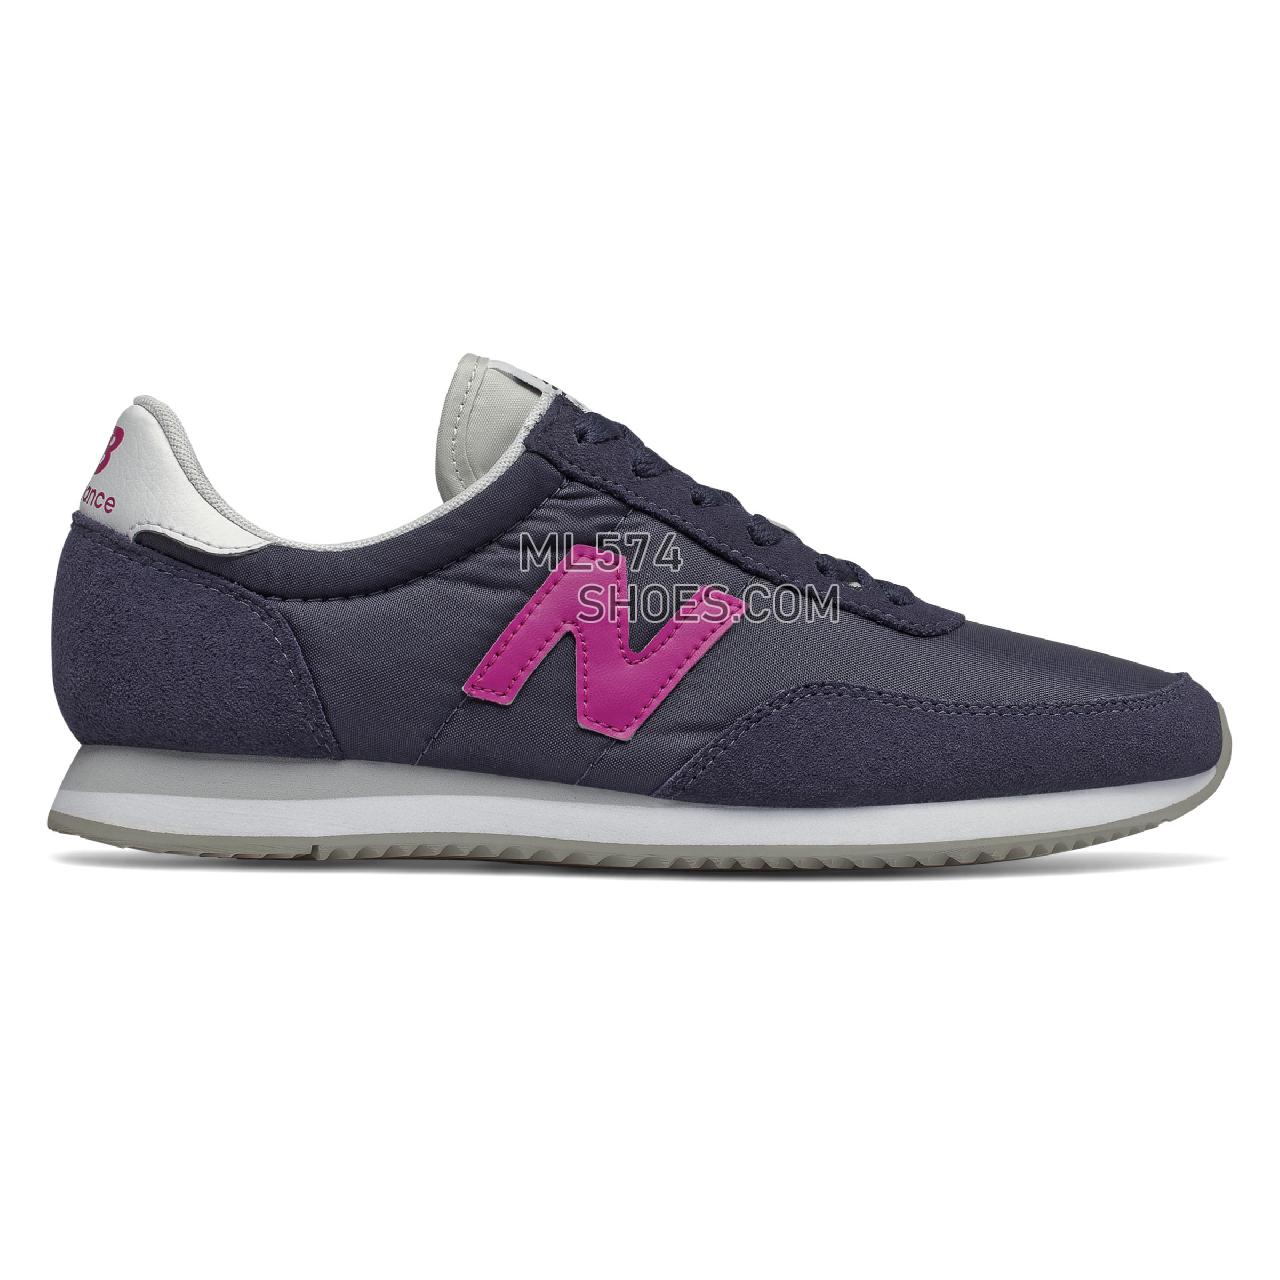 New Balance 720 - Women's Classic Sneakers - Pigment with Jewel - WL720ED